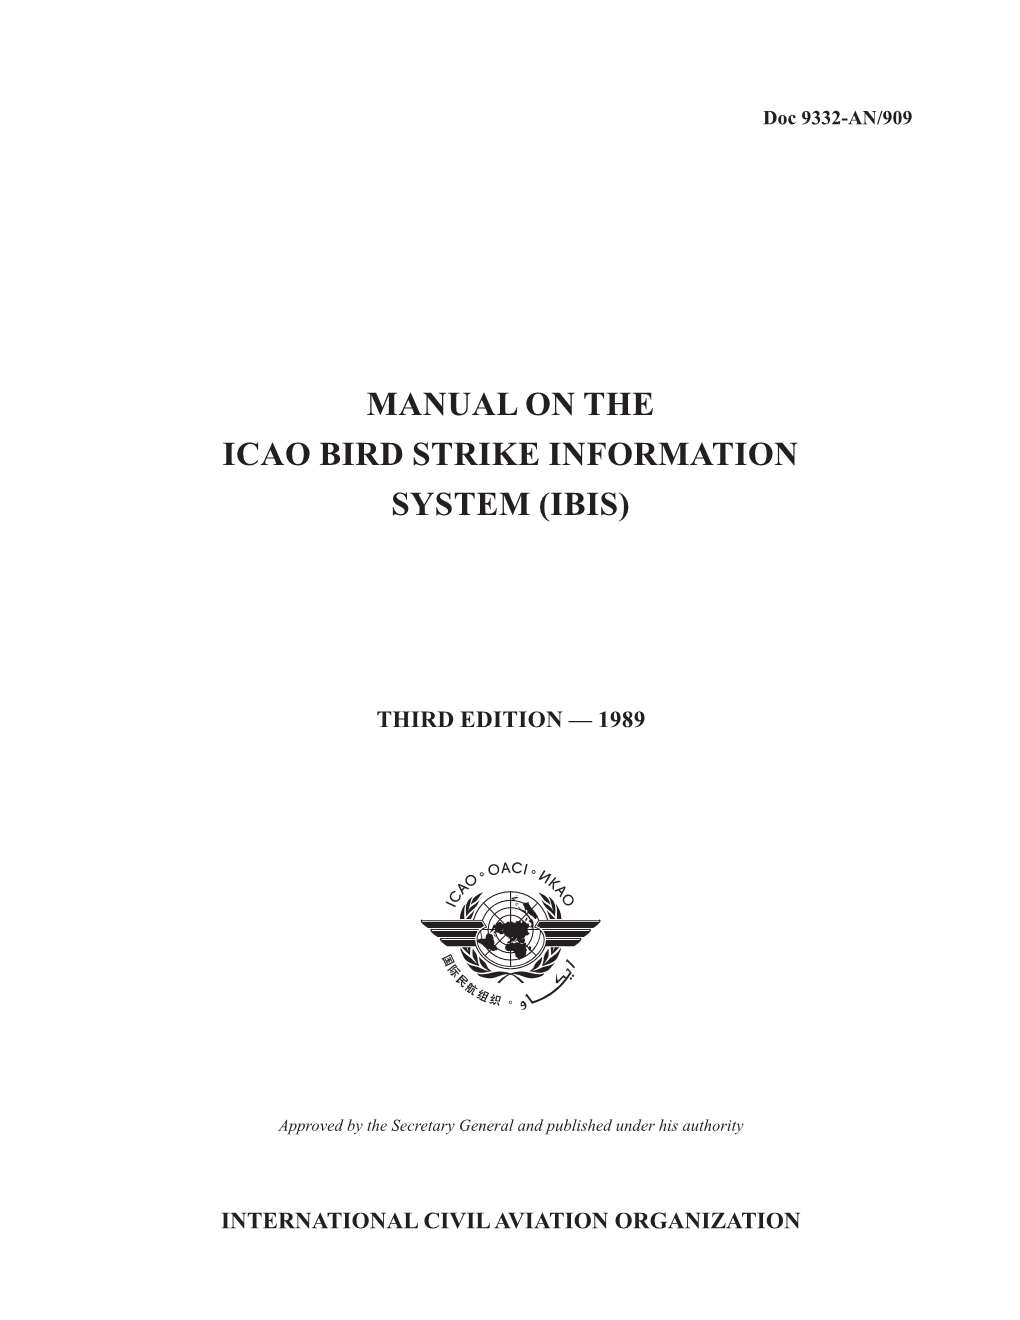 Manual on the Icao Bird Strike Information System (Ibis)